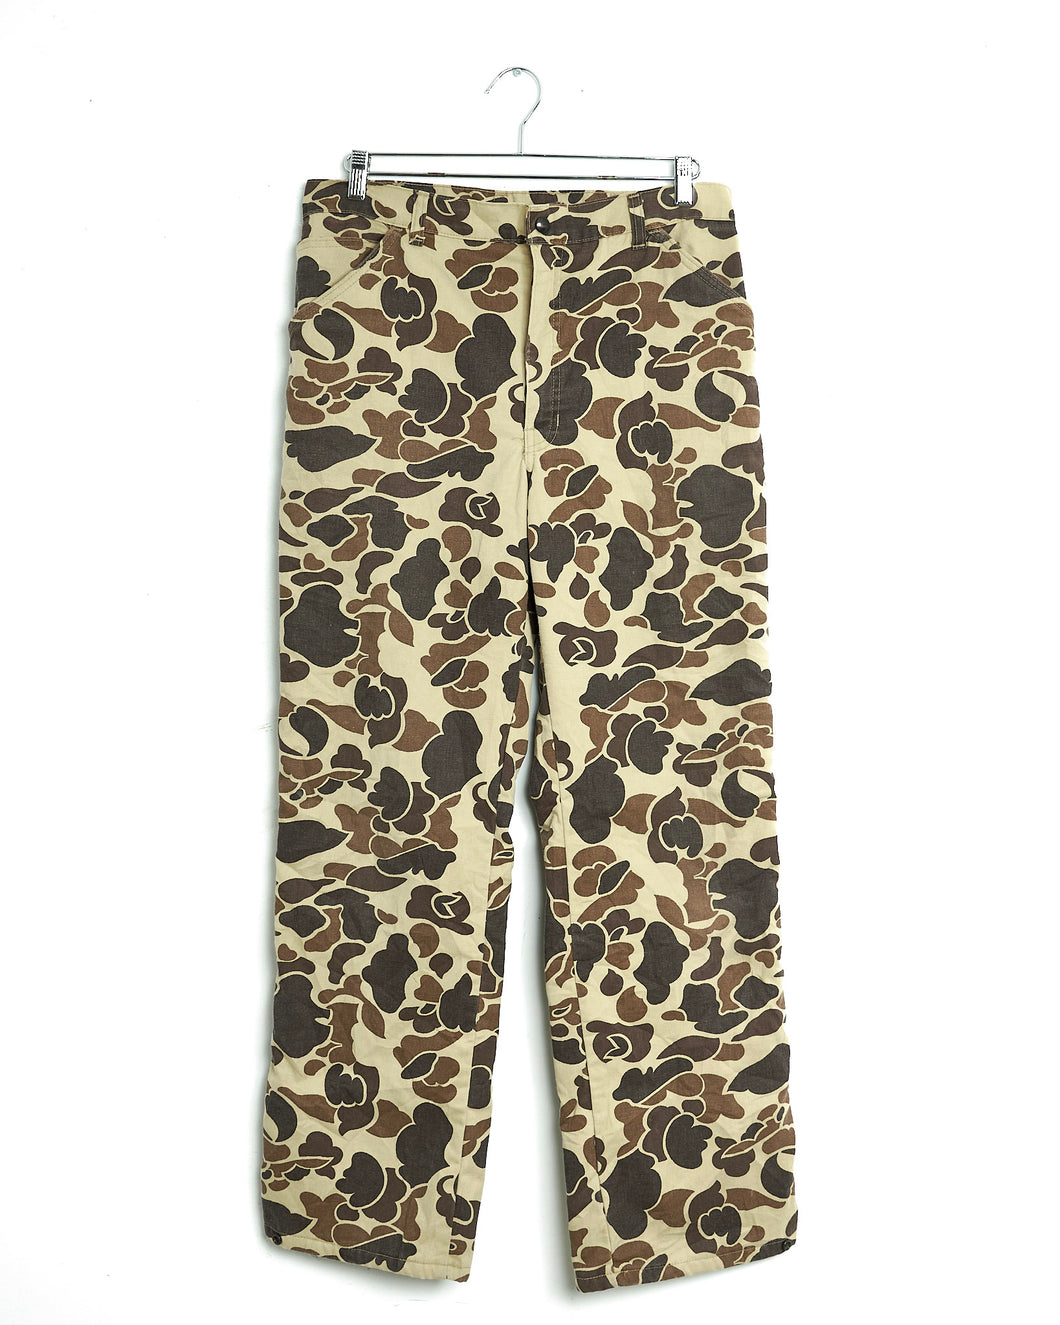 1980s Insulated Walls Duck Camo Trousers Size 33